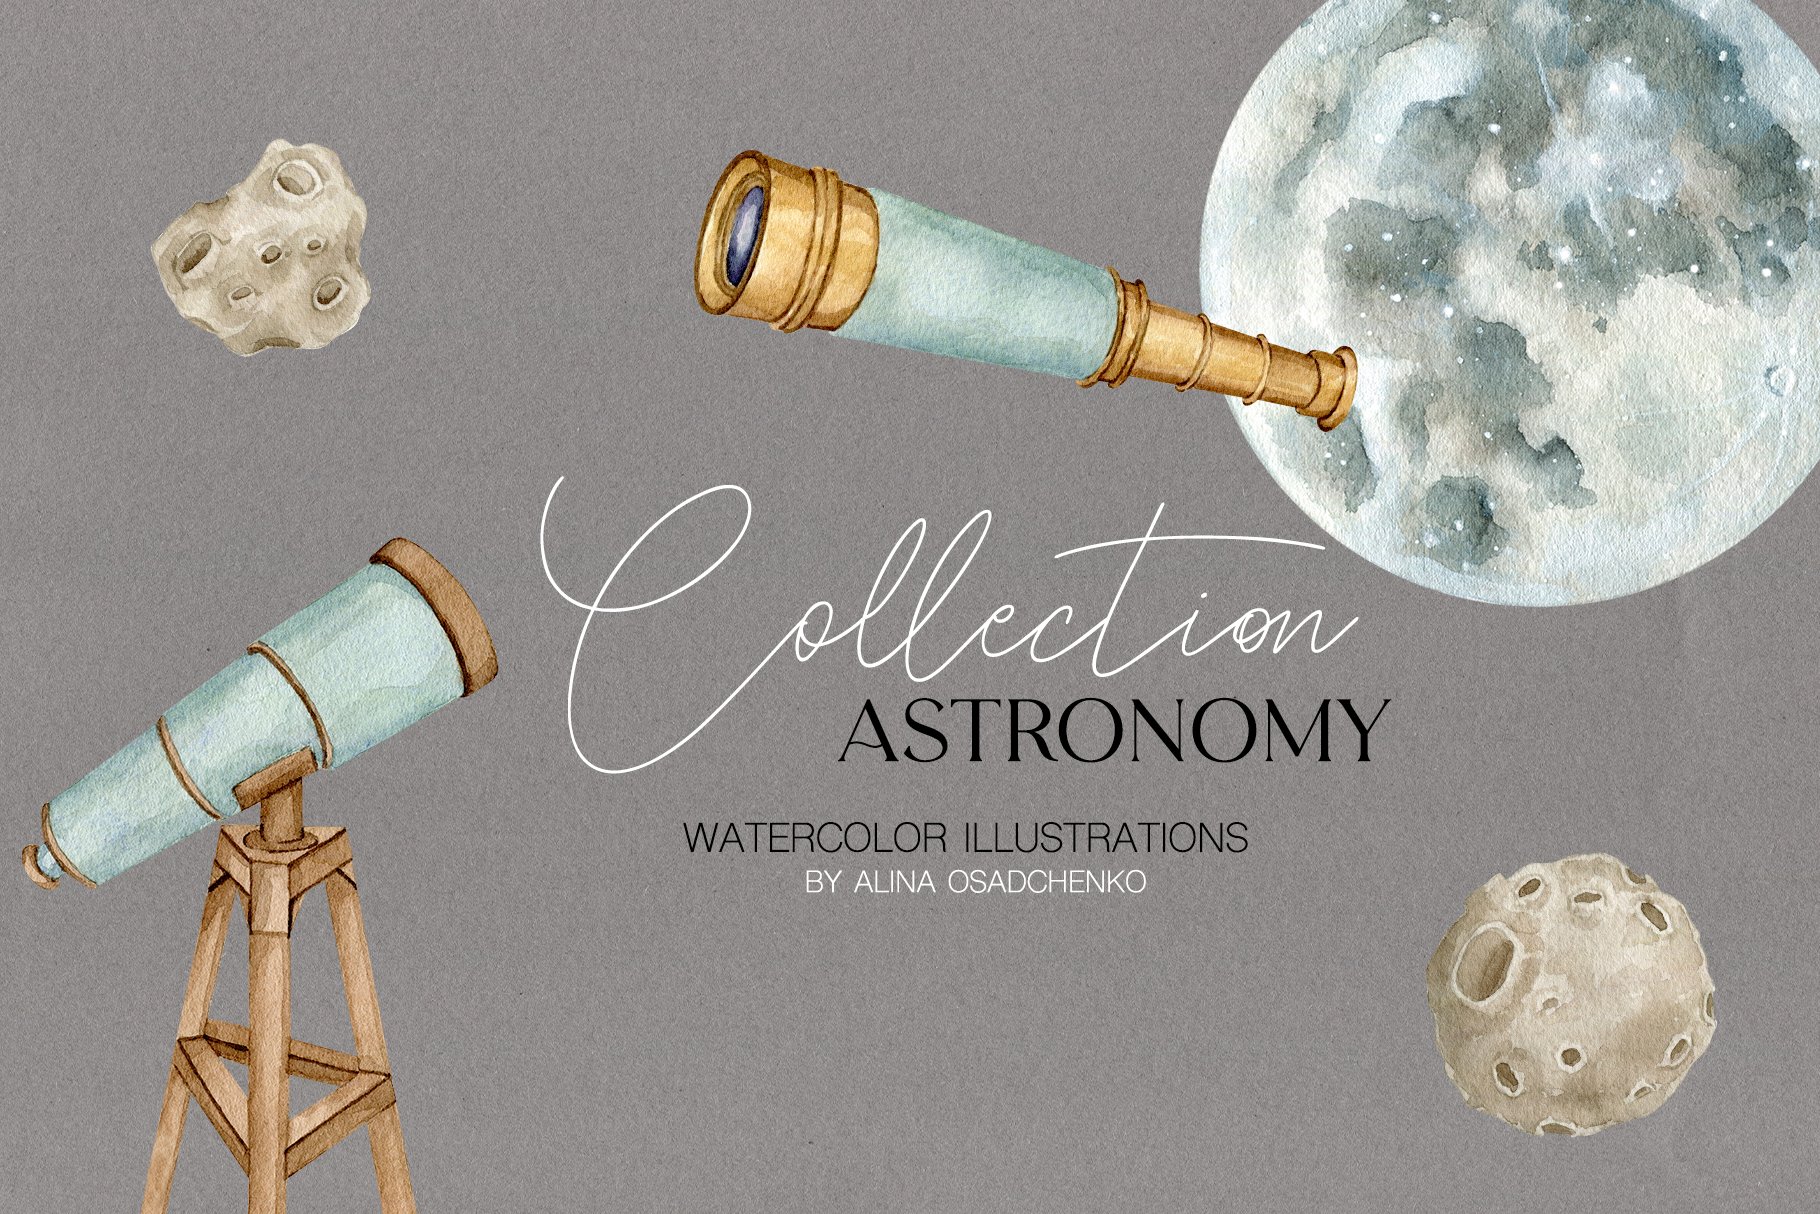 Astronomy watercolor collection cover image.